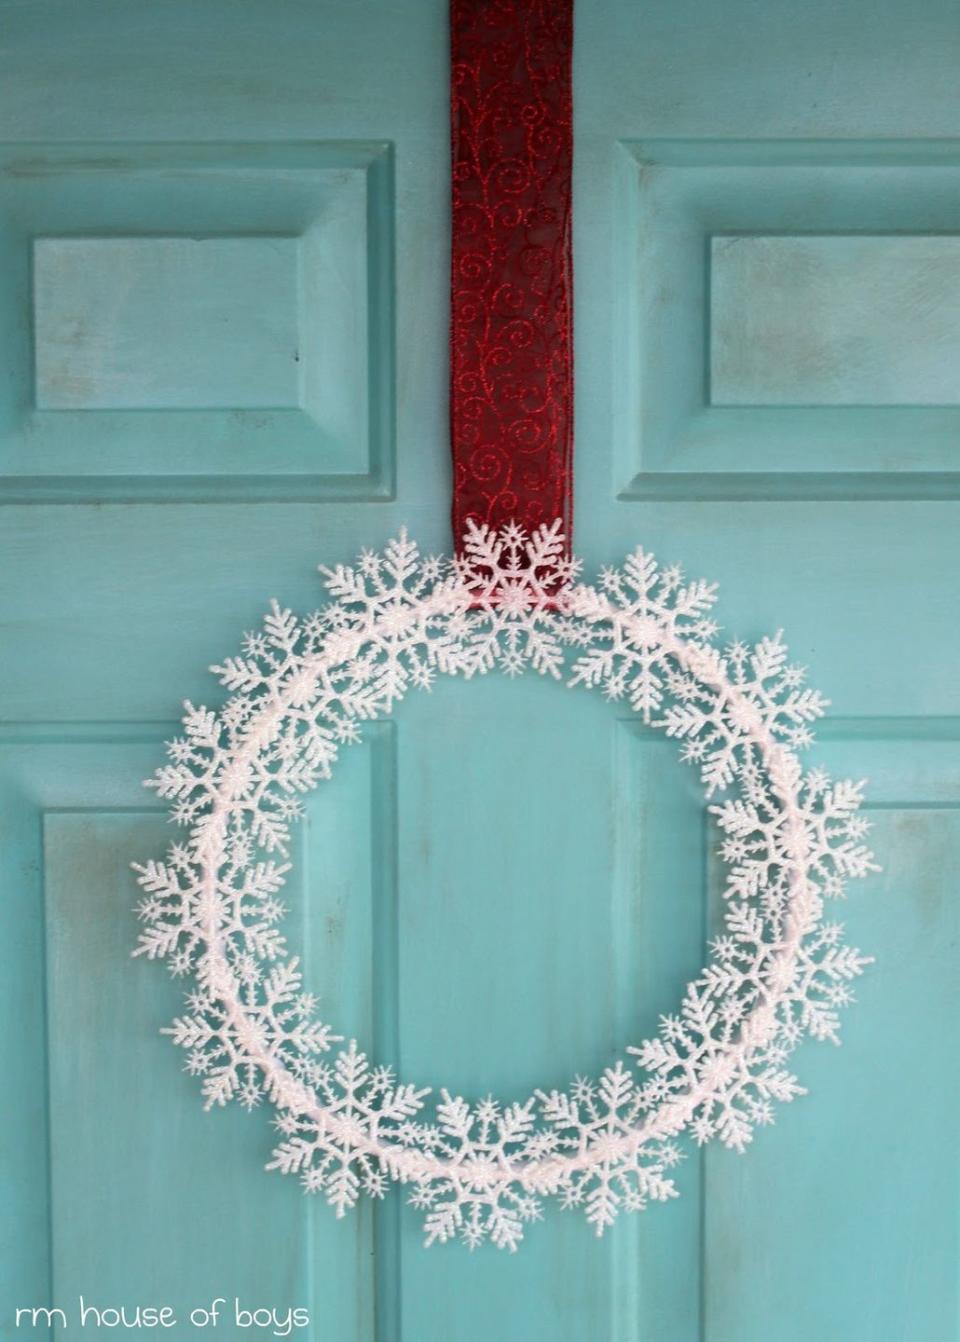 <p>Hang a wreath full of snowflakes from a bold ribbon for a color-block effect on an icy blue door (or any color door, really). You'll need white felt and an embroidery hoop.</p><p><a class="link " href="https://www.amazon.com/kockuu-Snowflakes-Snowflake-Ornaments-Decorations/dp/B07ZNJSMCD?tag=syn-yahoo-20&ascsubtag=%5Bartid%7C10067.g.42146682%5Bsrc%7Cyahoo-us" rel="nofollow noopener" target="_blank" data-ylk="slk:Shop Now">Shop Now</a><br><br><em><a href="http://rmhouseofnoise.blogspot.com/2011/11/snowflakes-keep-falling-on-my-head.html" rel="nofollow noopener" target="_blank" data-ylk="slk:Get the tutorial at RM House of Boys »" class="link ">Get the tutorial at RM House of Boys »</a></em> </p>